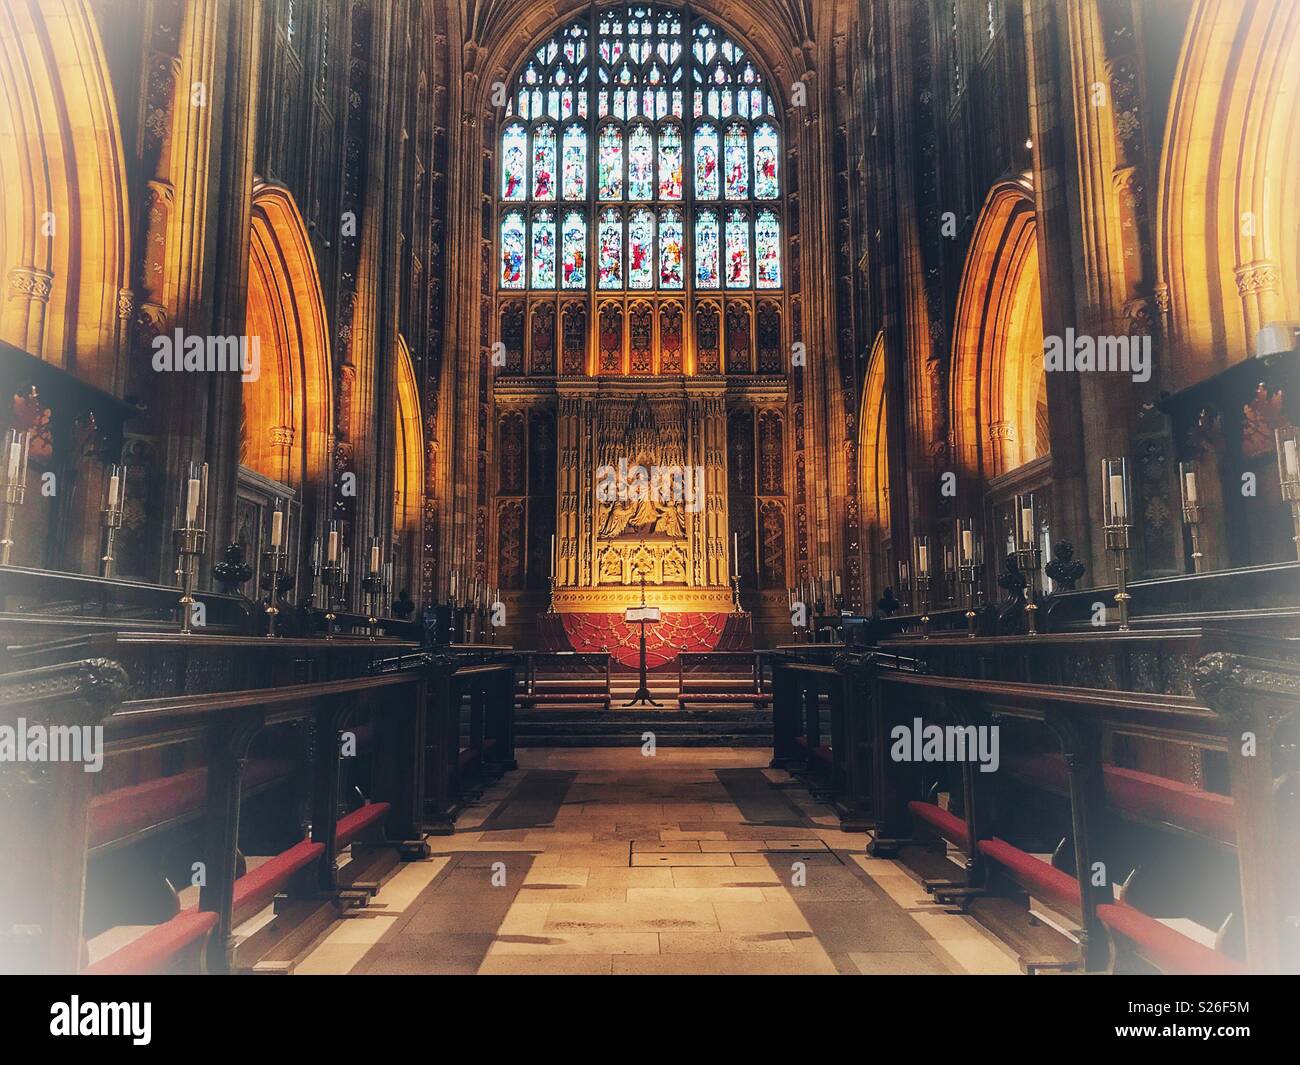 Altar, choir stalls, stained glass window, in the magnificent Sherborne Abbey, Sherborne, Dorset, England Stock Photo